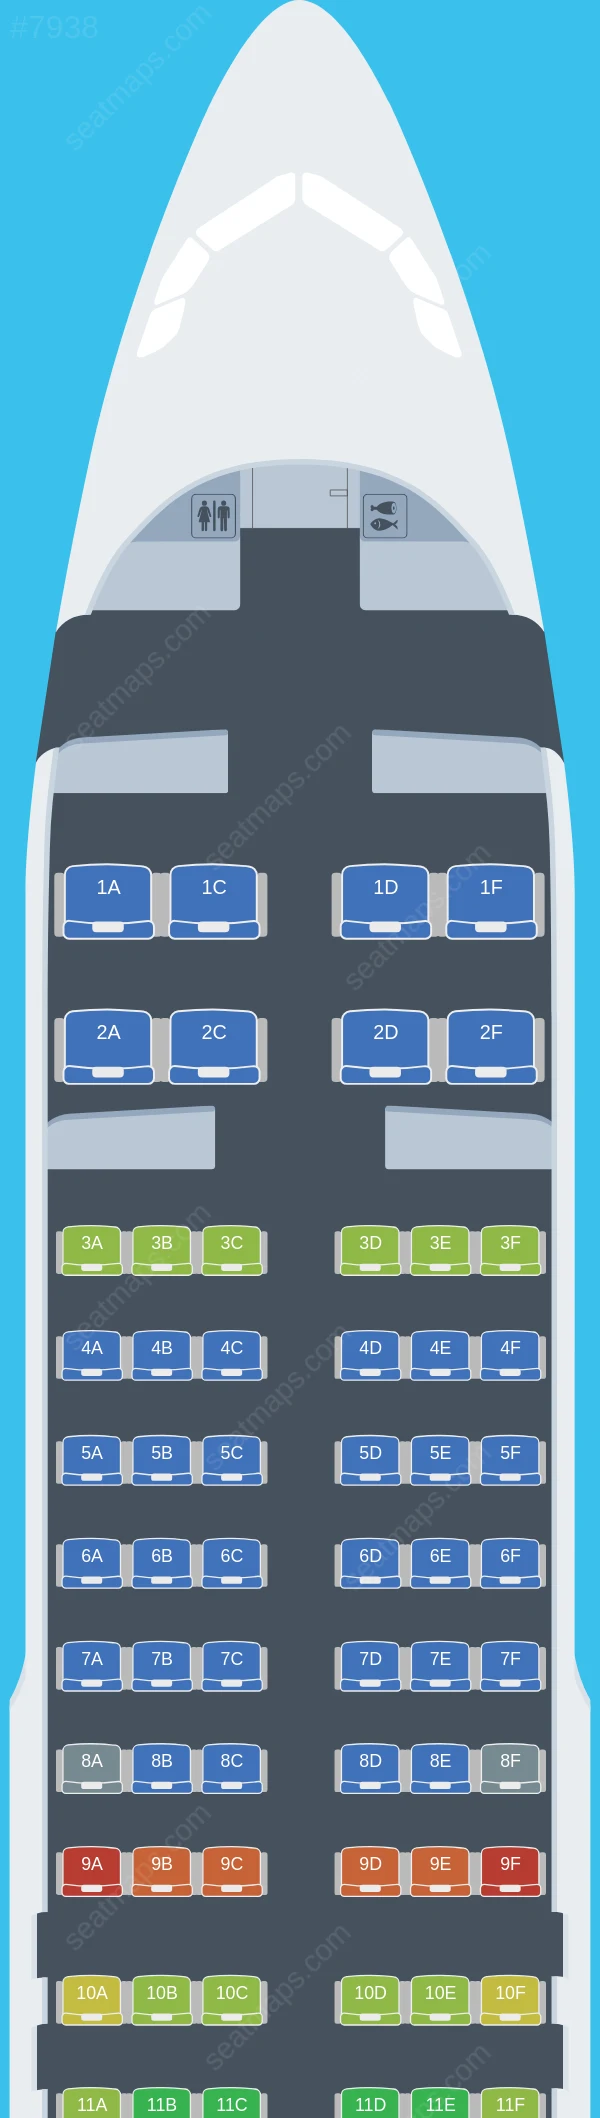 Qingdao Airlines Airbus A320-200 seatmap preview